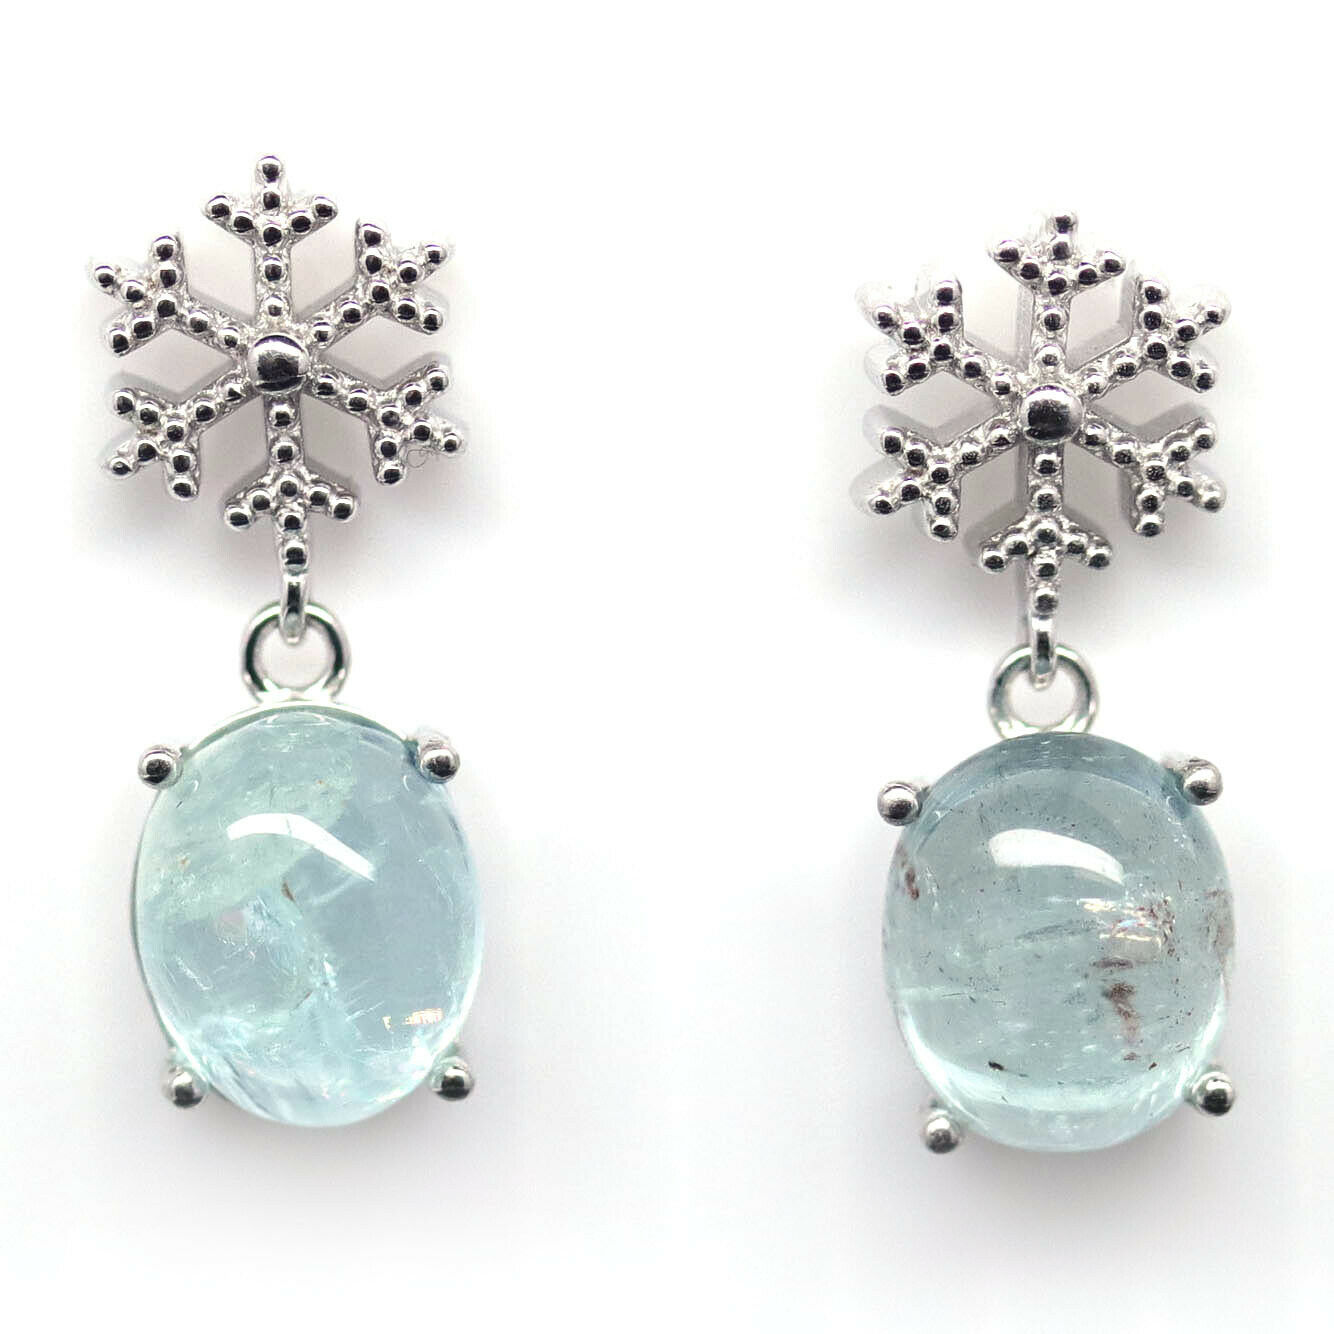 A pair of 925 silver snowflake shaped drop earrings set with cabochon cut aquamarines, L. 2.1cm.